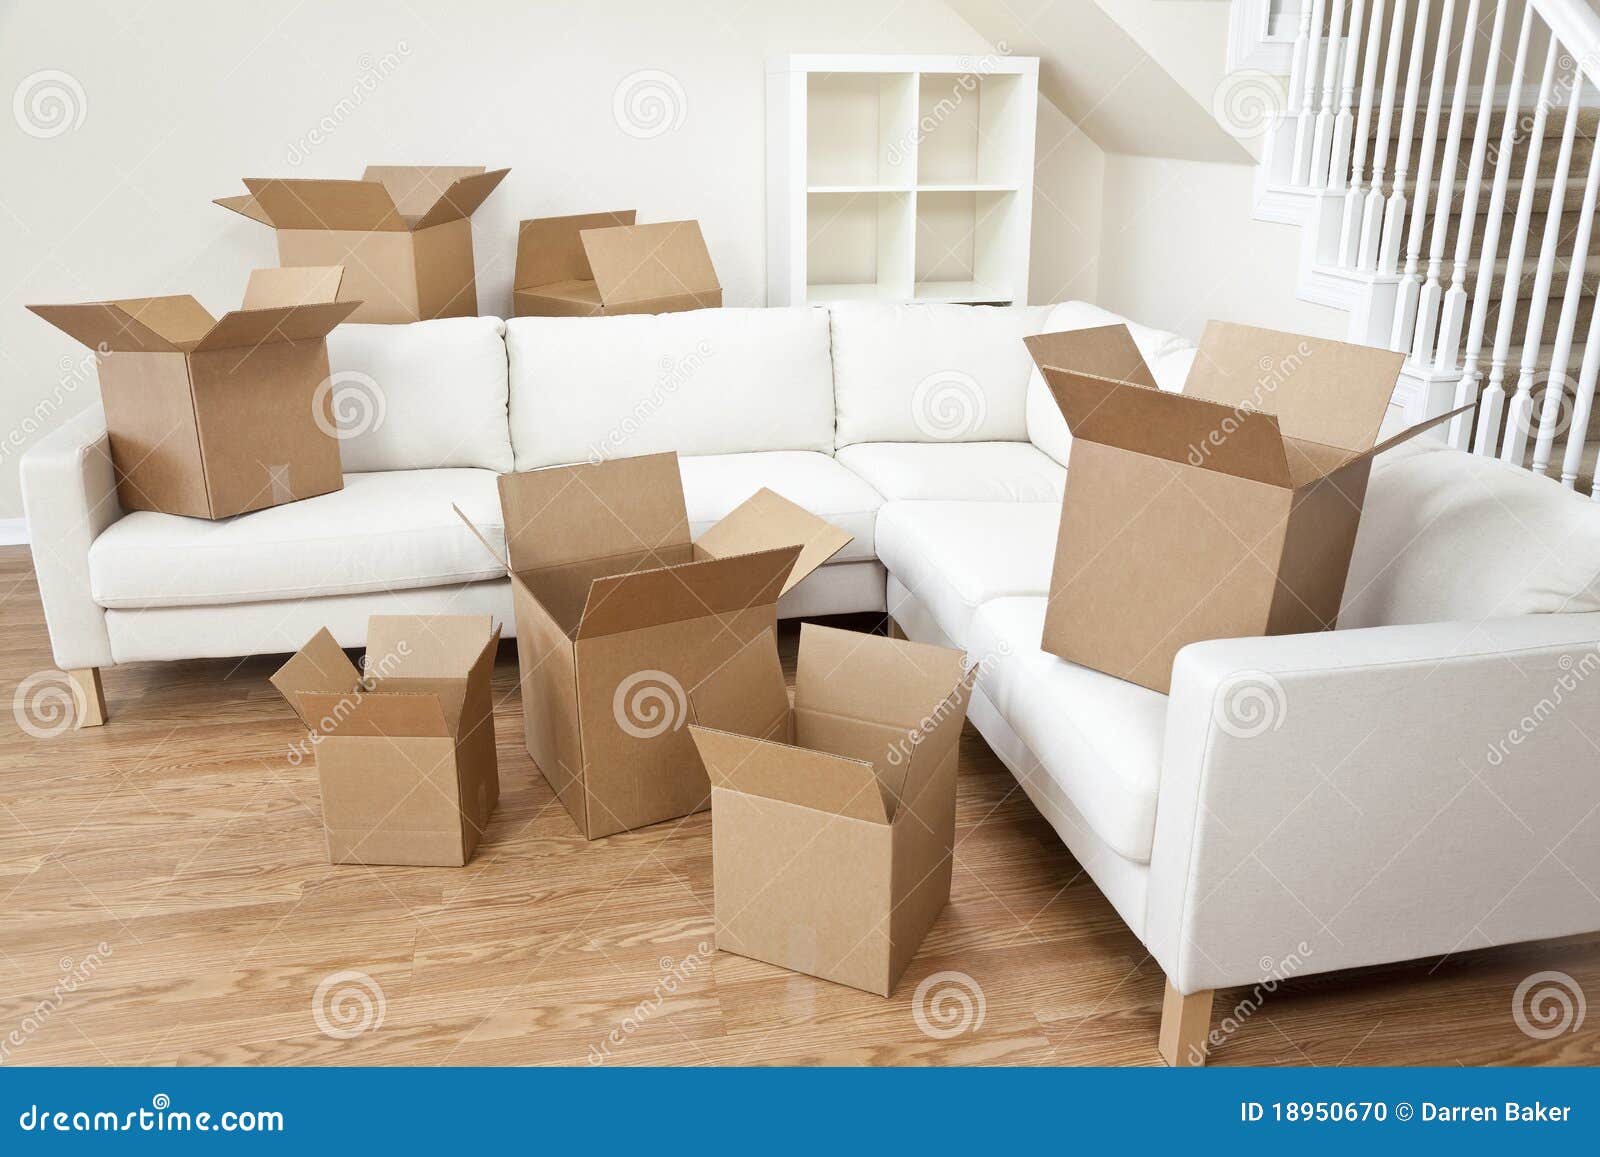 Room of Cardboard Boxes for Moving House Stock Photo - Image of